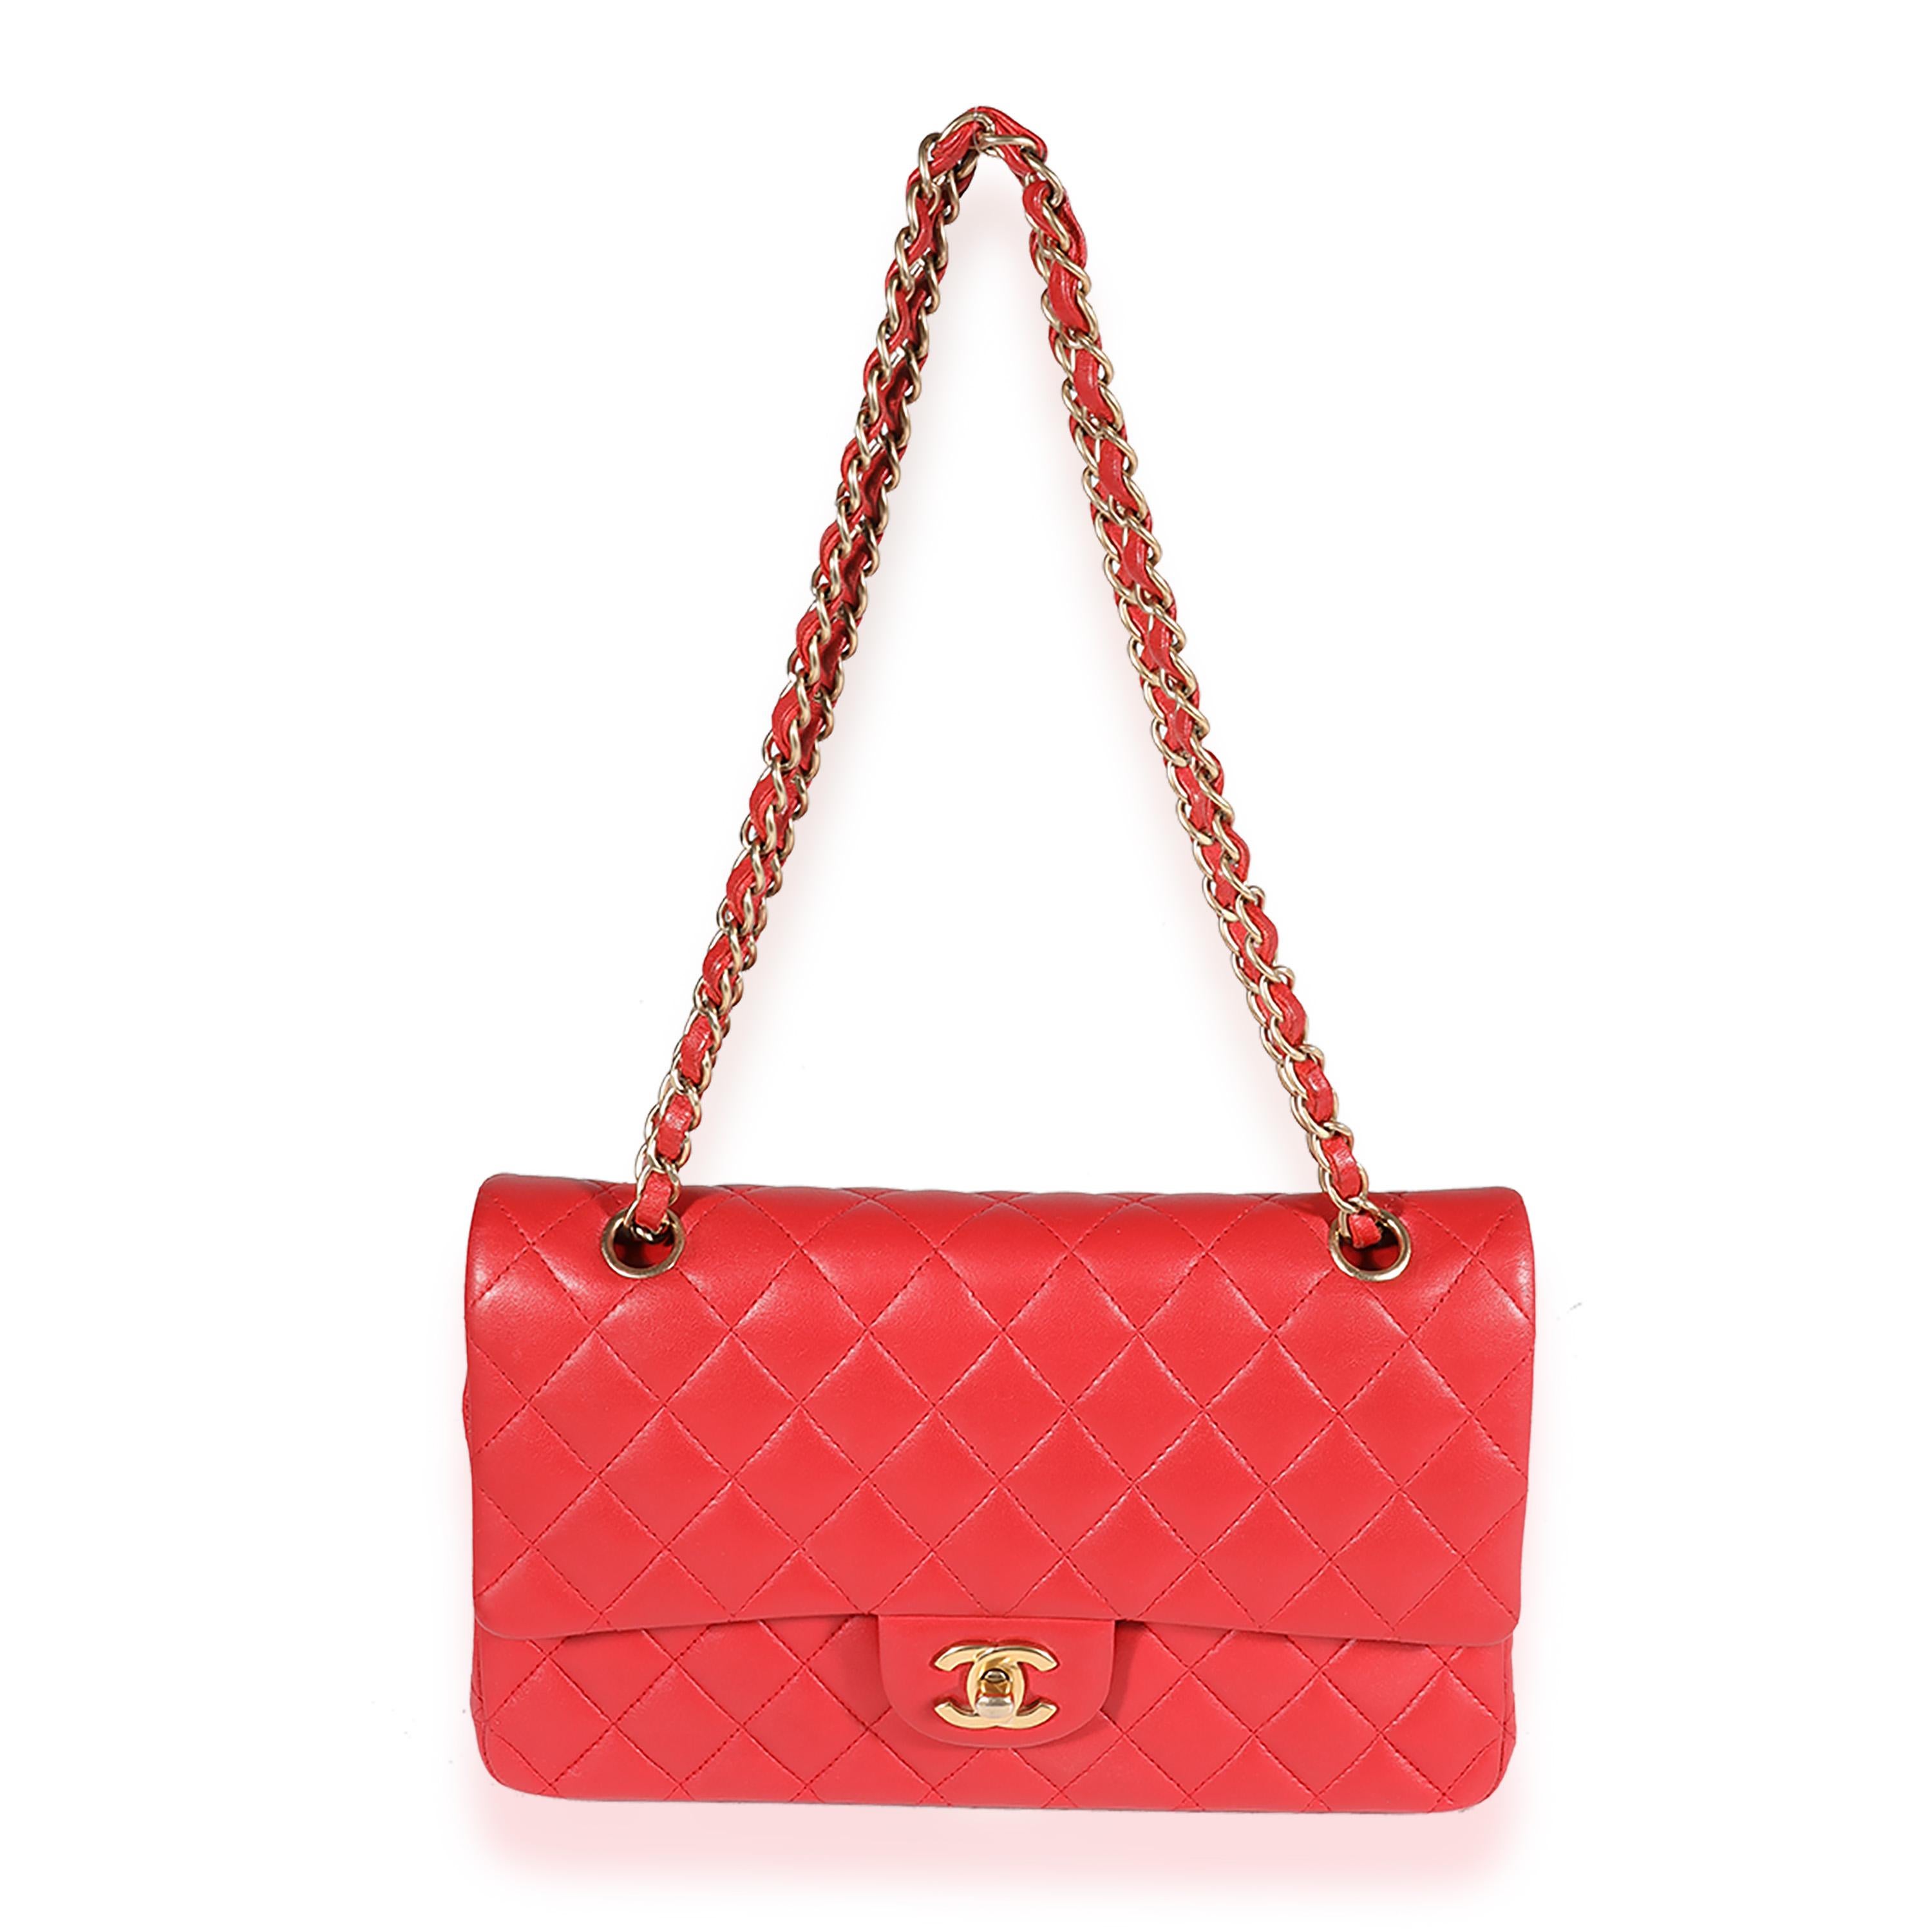 Listing Title: Chanel Red Quilted Lambskin Medium Classic Double Flap Bag
SKU: 123131
MSRP: 8800.00
Condition: Pre-owned 
Handbag Condition: Very Good
Condition Comments: Very Good Condition. Scuffing at corners and throughout exterior and